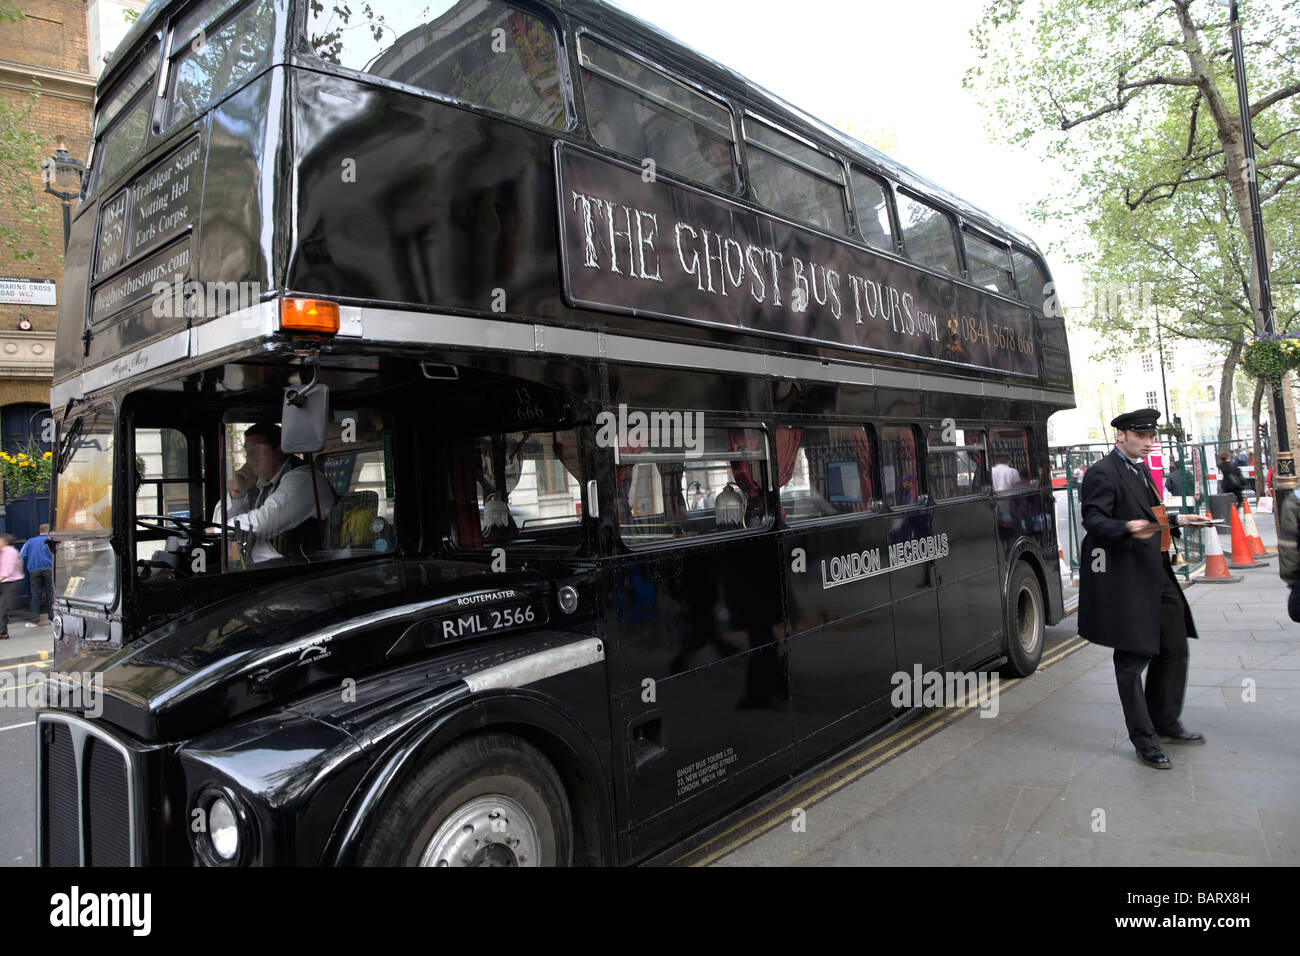 The Ghost Bus Tours London England Stock Photo